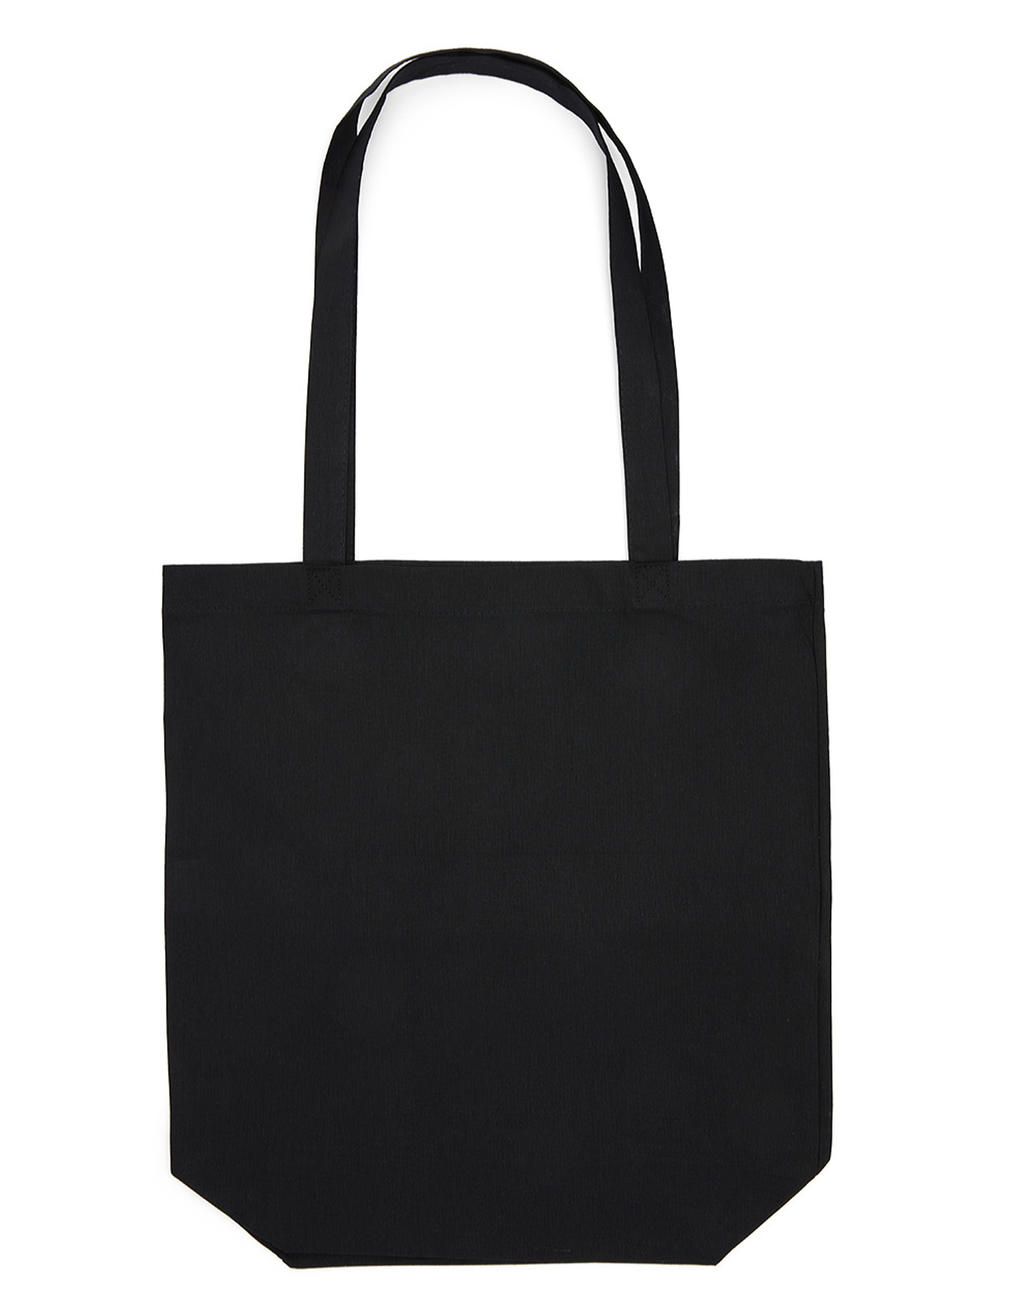  Cotton Bag LH with Gusset in Farbe Black